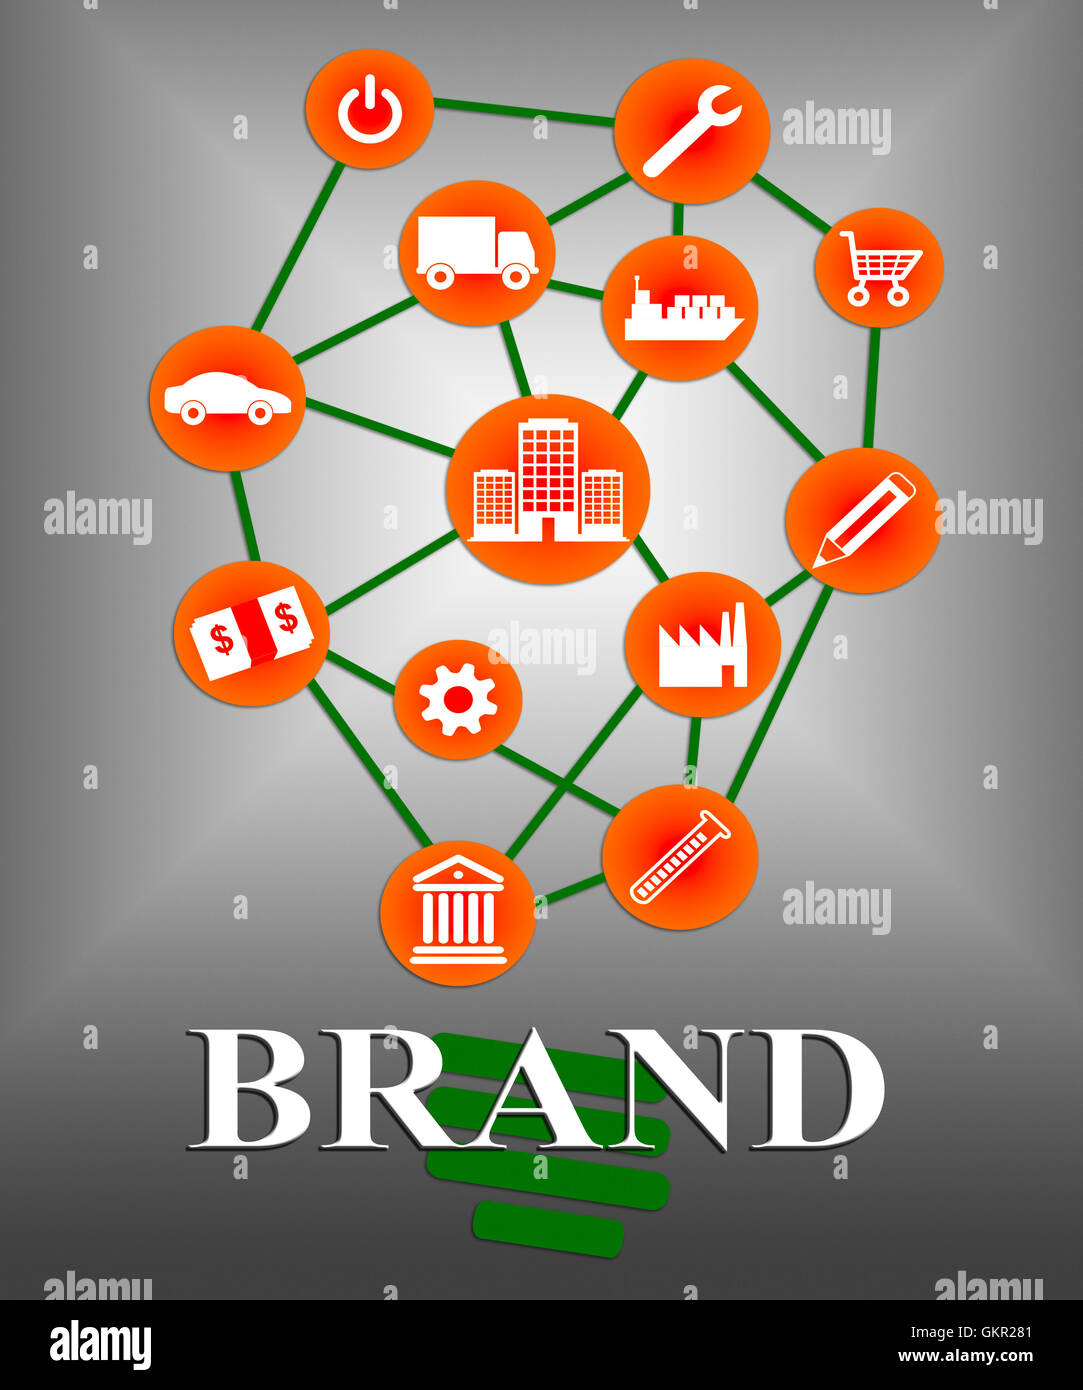 Brand Icons Indicating Company Identity And Branded Stock Photo